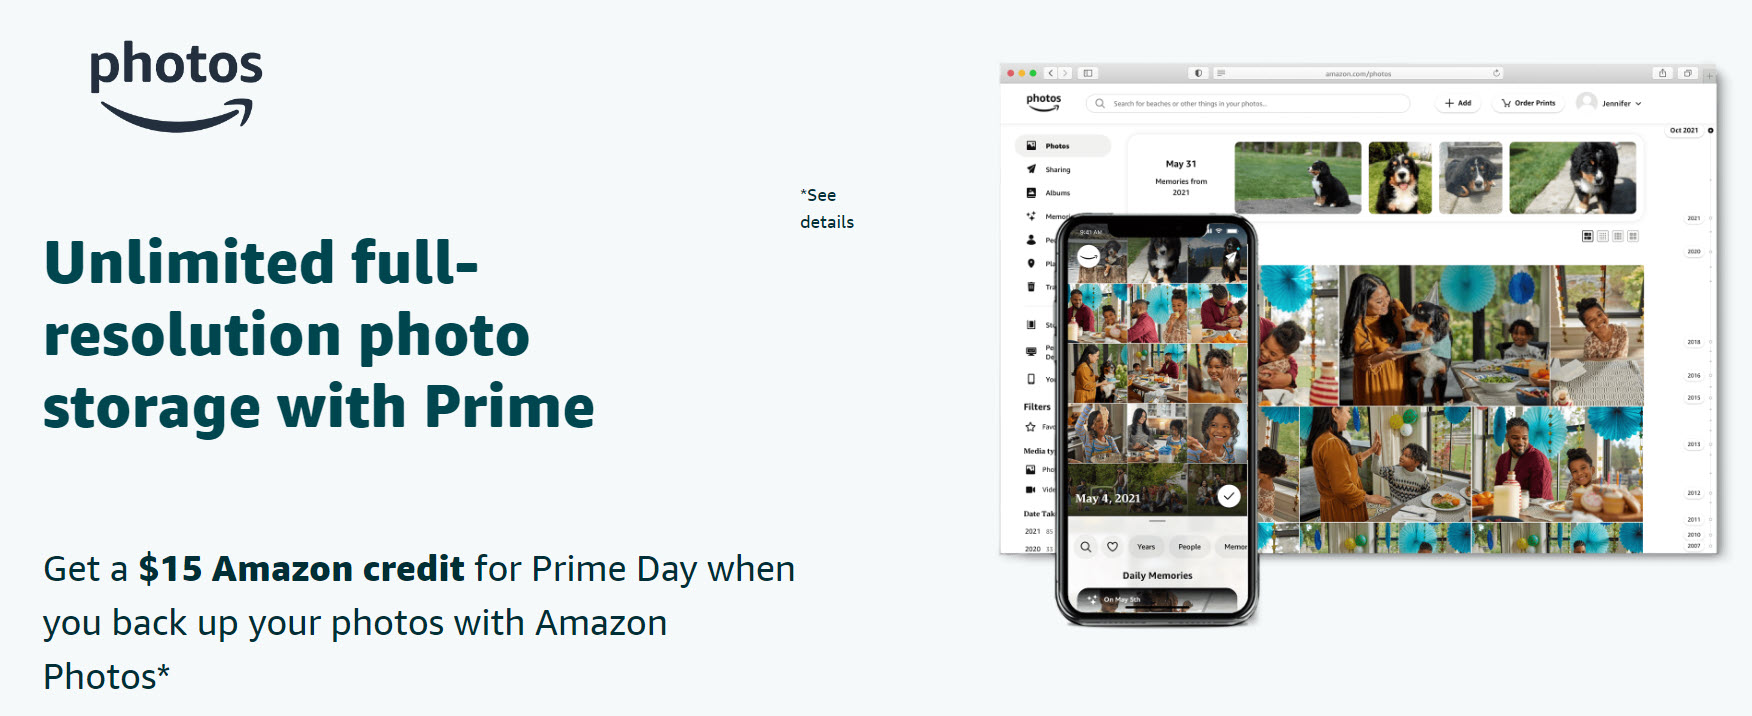 This is an AMAZING opportunity not only to get a $15 FREE CREDIT to use for Amazon Prime Day, but also a great way to backup all your scanned family photos! This offer is EXCLUSIVE to Amazon Prime members who have NEVER used Amazon Photos ... all you need to do is upload just ONE PHOTO and you'll be able to secure your $15 reward.